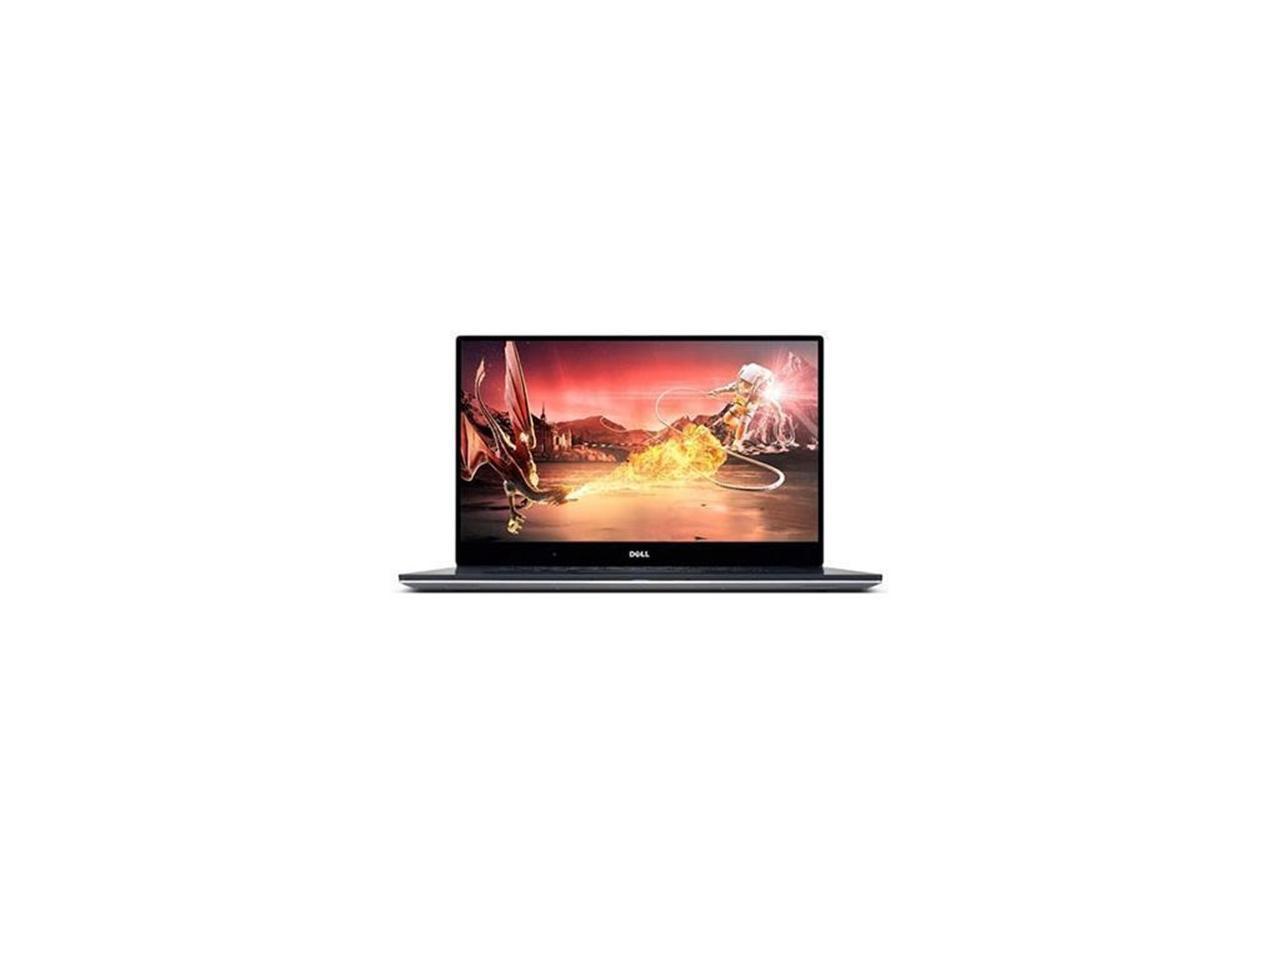 Dell GRADE A XPS 15 9550 15.6" TOUCHSCREEN Intel Core i7-6700HQ 6th Generation Quad Core 6M Cache, up to 3.5GHz 1TB PCIe Solid State Drive 16GB DDR4 NVIDIA GeForce GTX 960M with 2GB GDDR5 Notebook